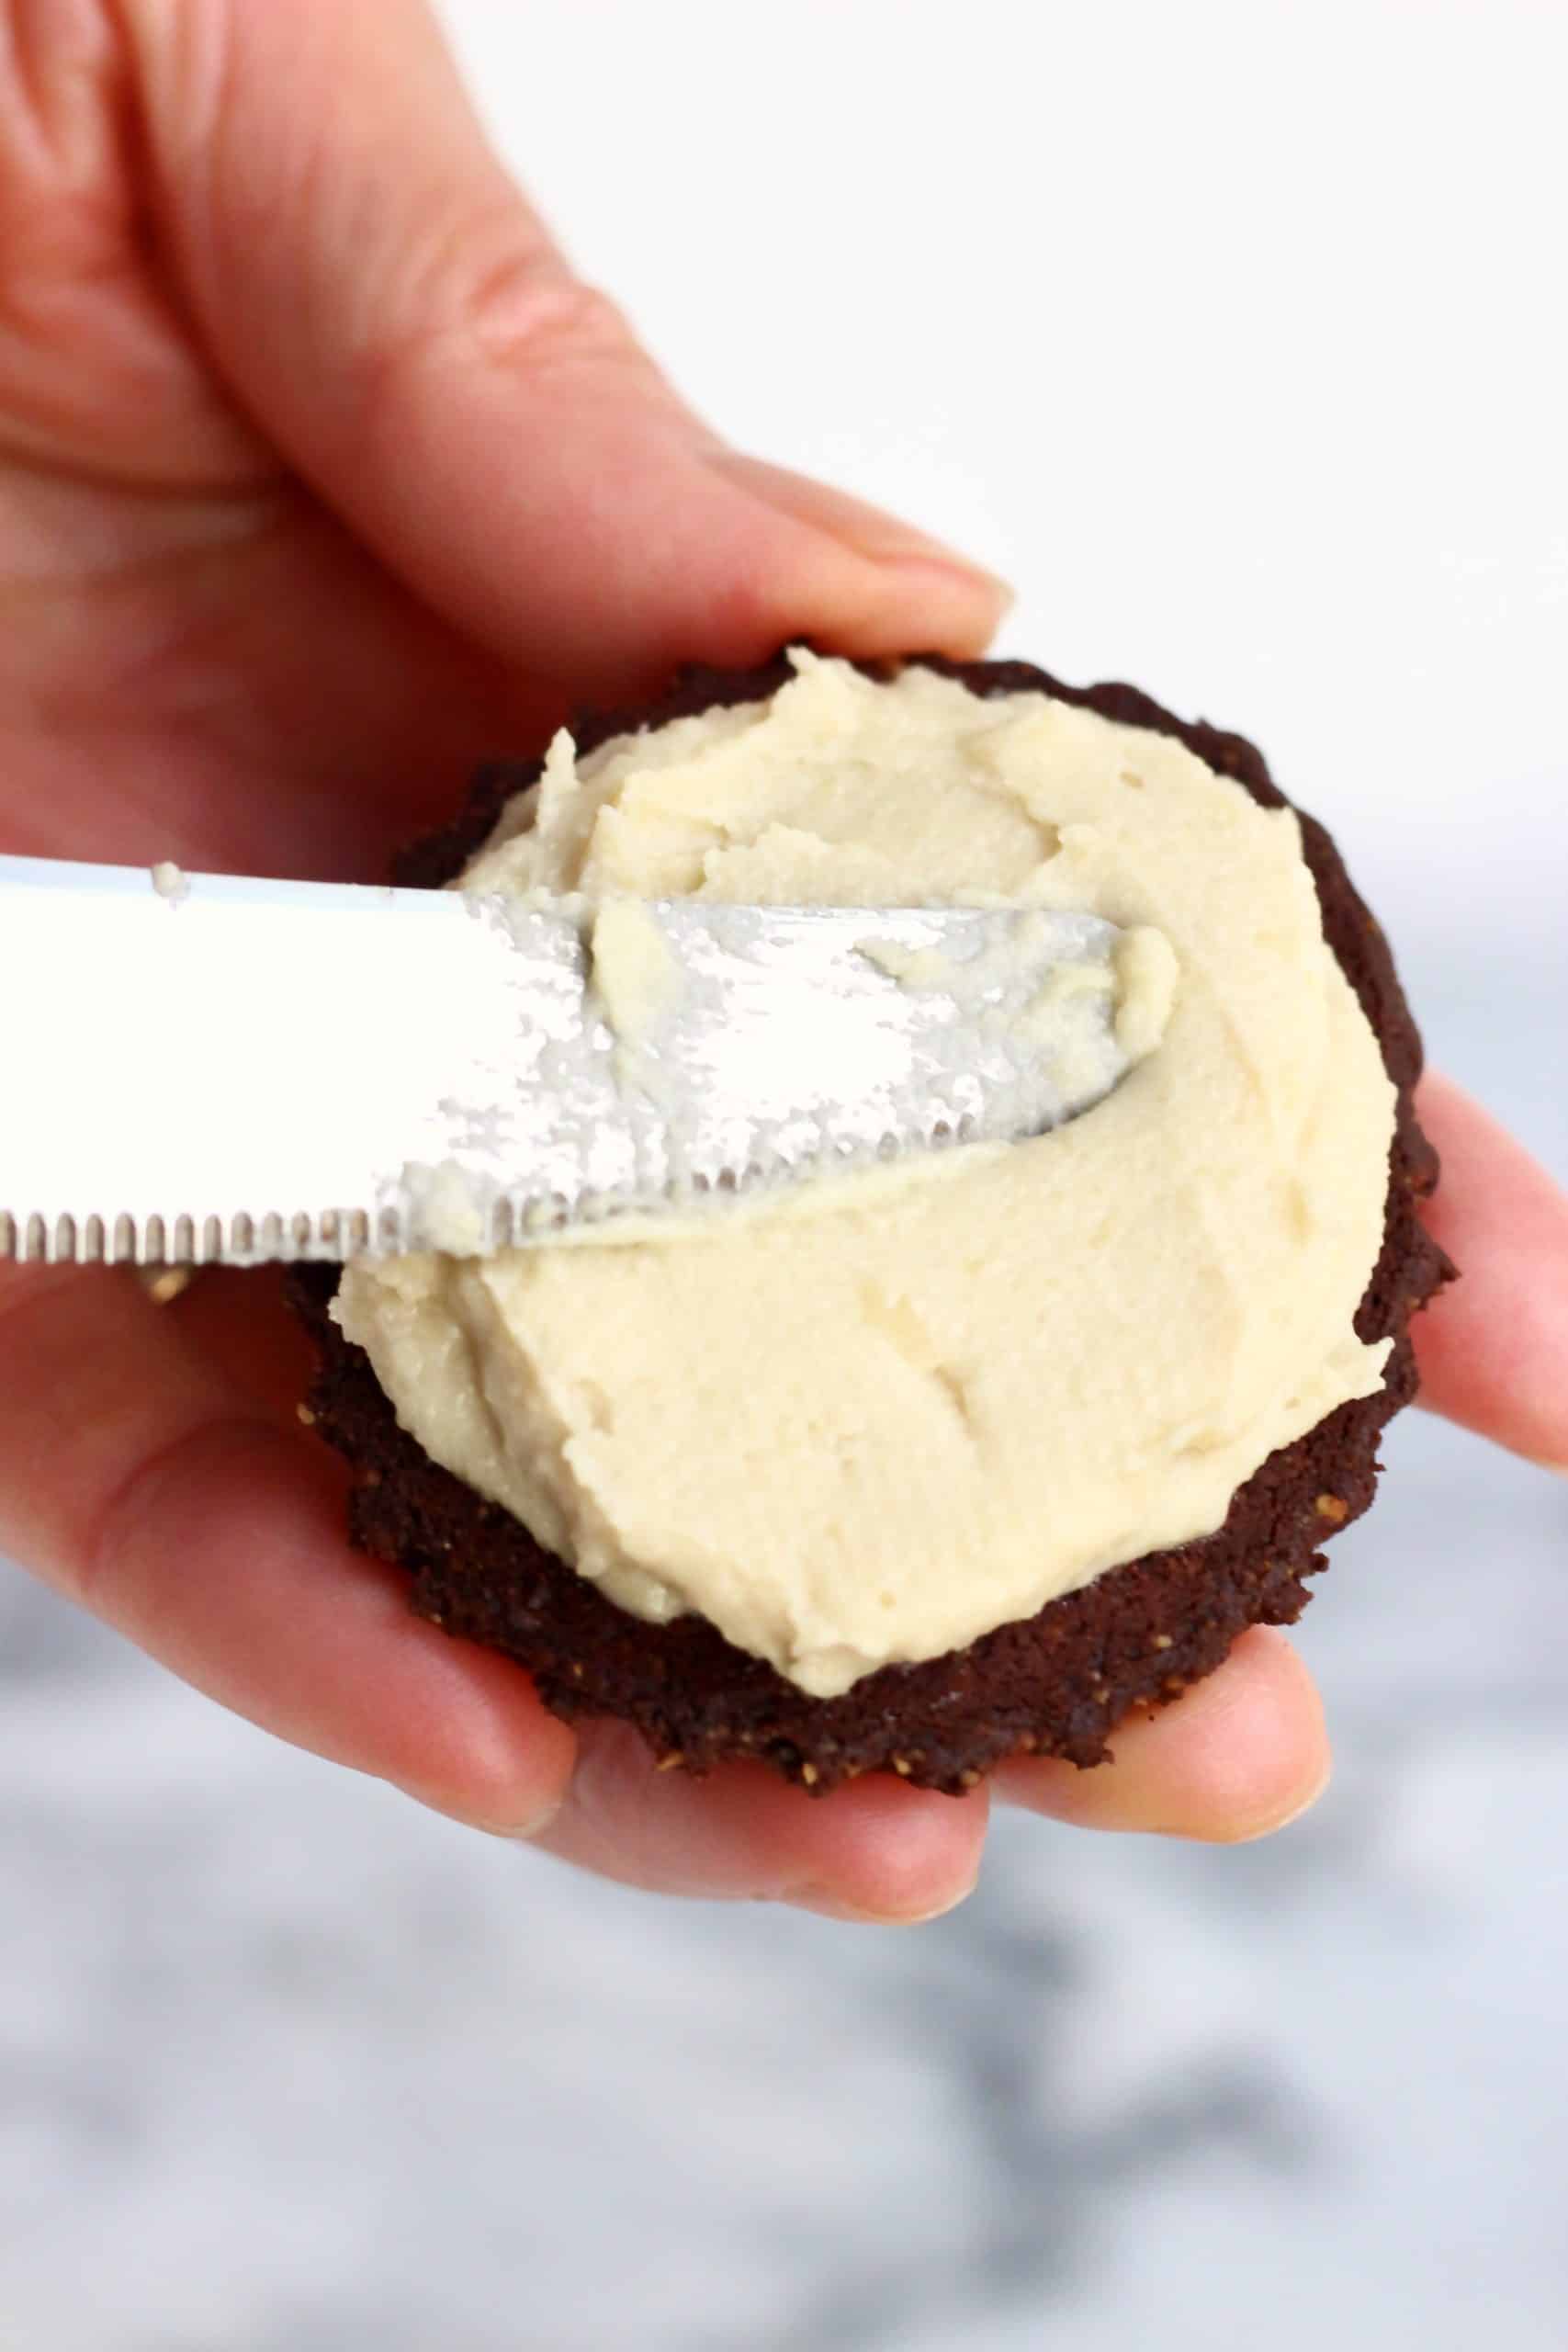 A gluten-free vegan homemade oreo cookie being spread with cream